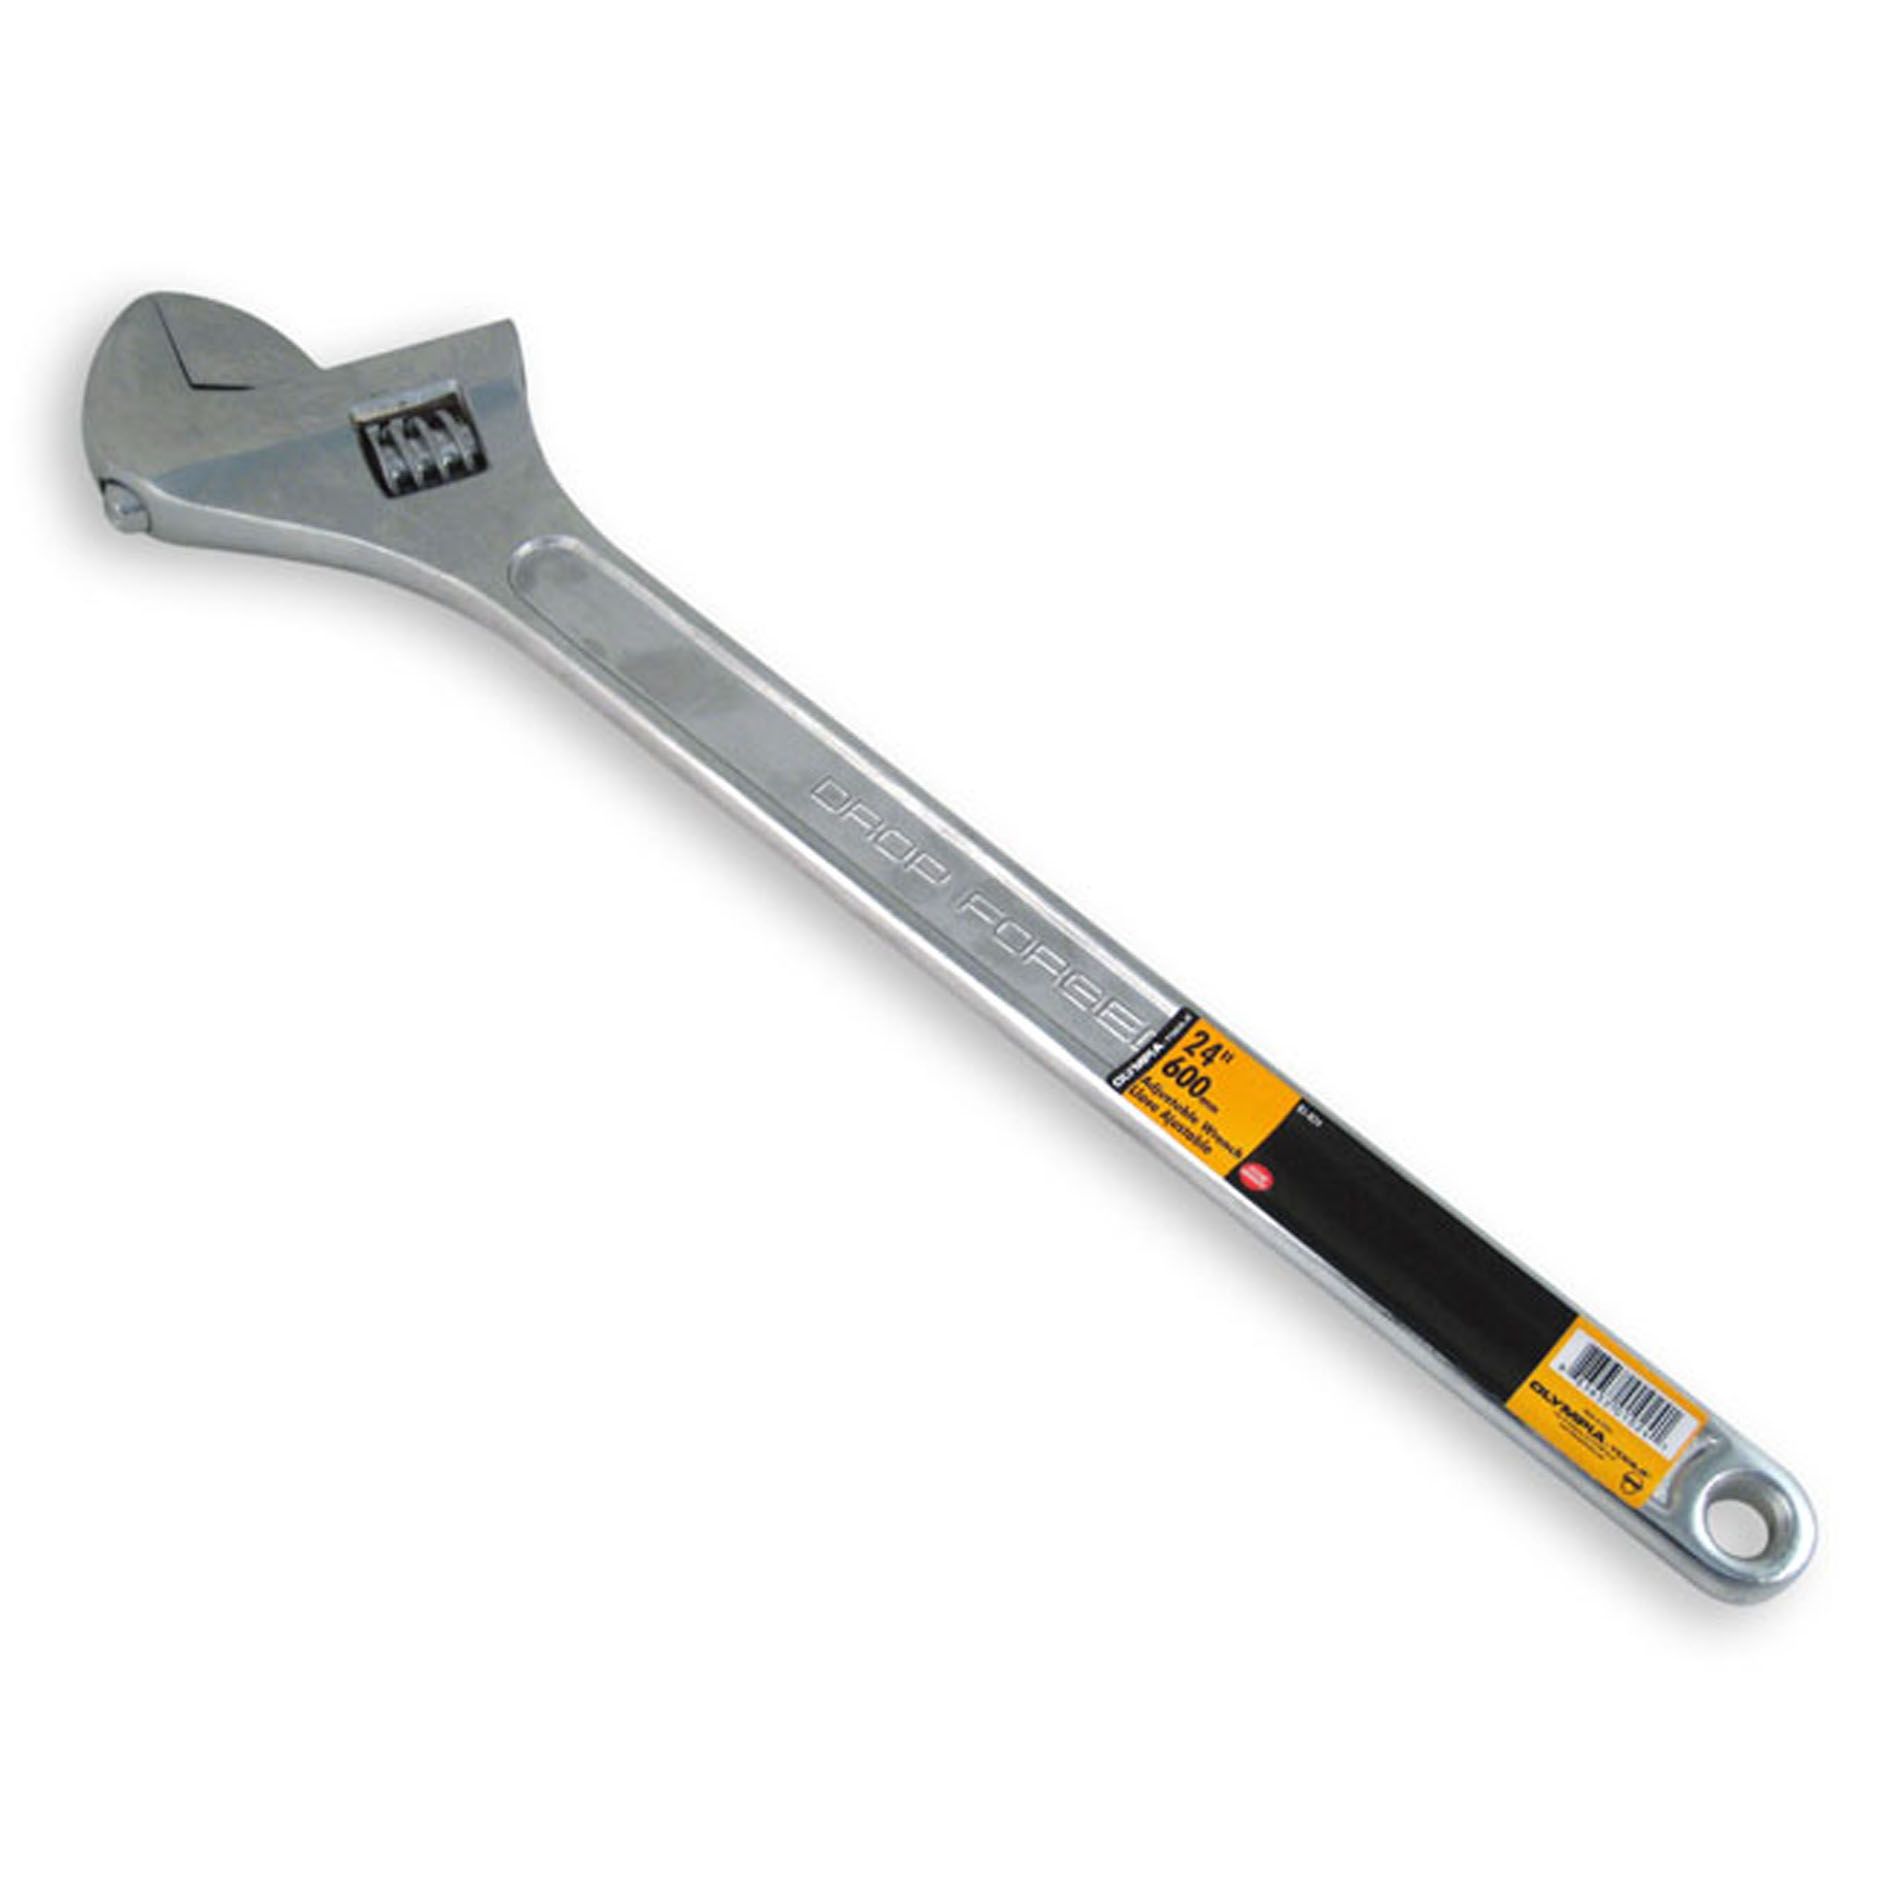 UPC 883652010241 product image for 24inch Adjustable Wrench | upcitemdb.com